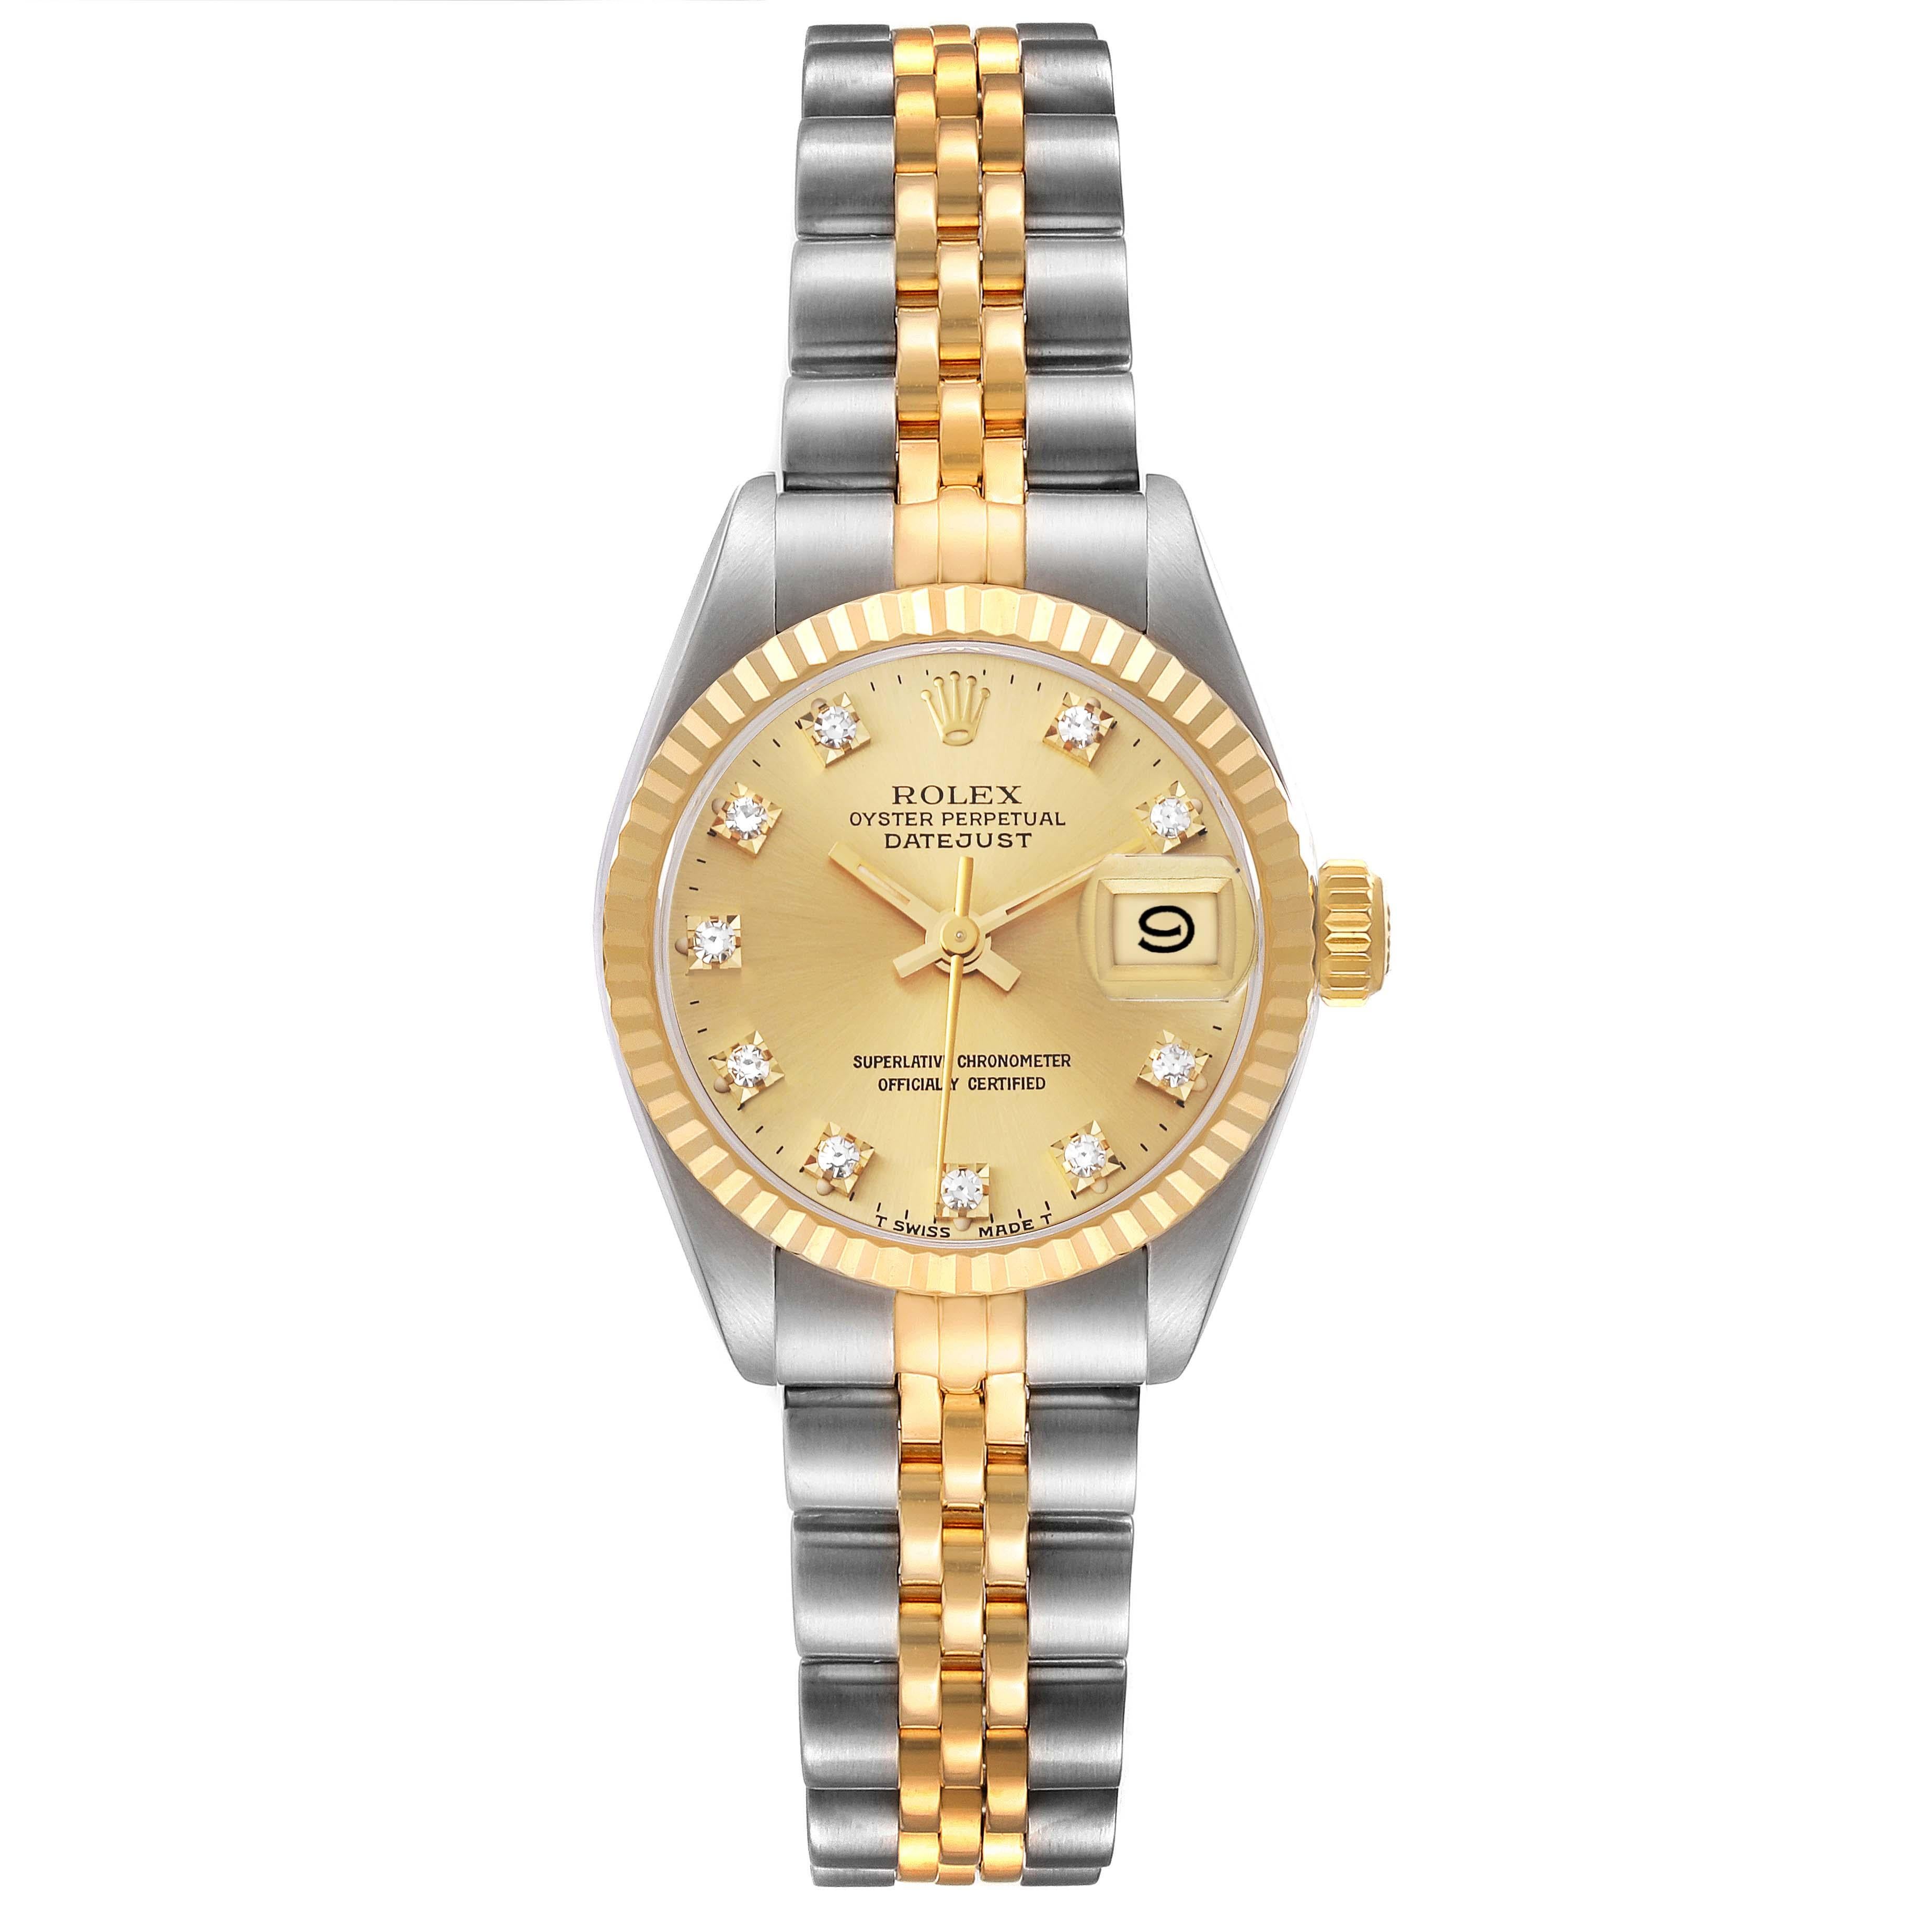 Rolex Datejust Champagne Diamond Dial Steel Yellow Gold Ladies Watch 69173. Officially certified chronometer automatic self-winding movement. Stainless steel oyster case 26.0 mm in diameter. Rolex logo on the crown. 18k yellow gold fluted bezel.